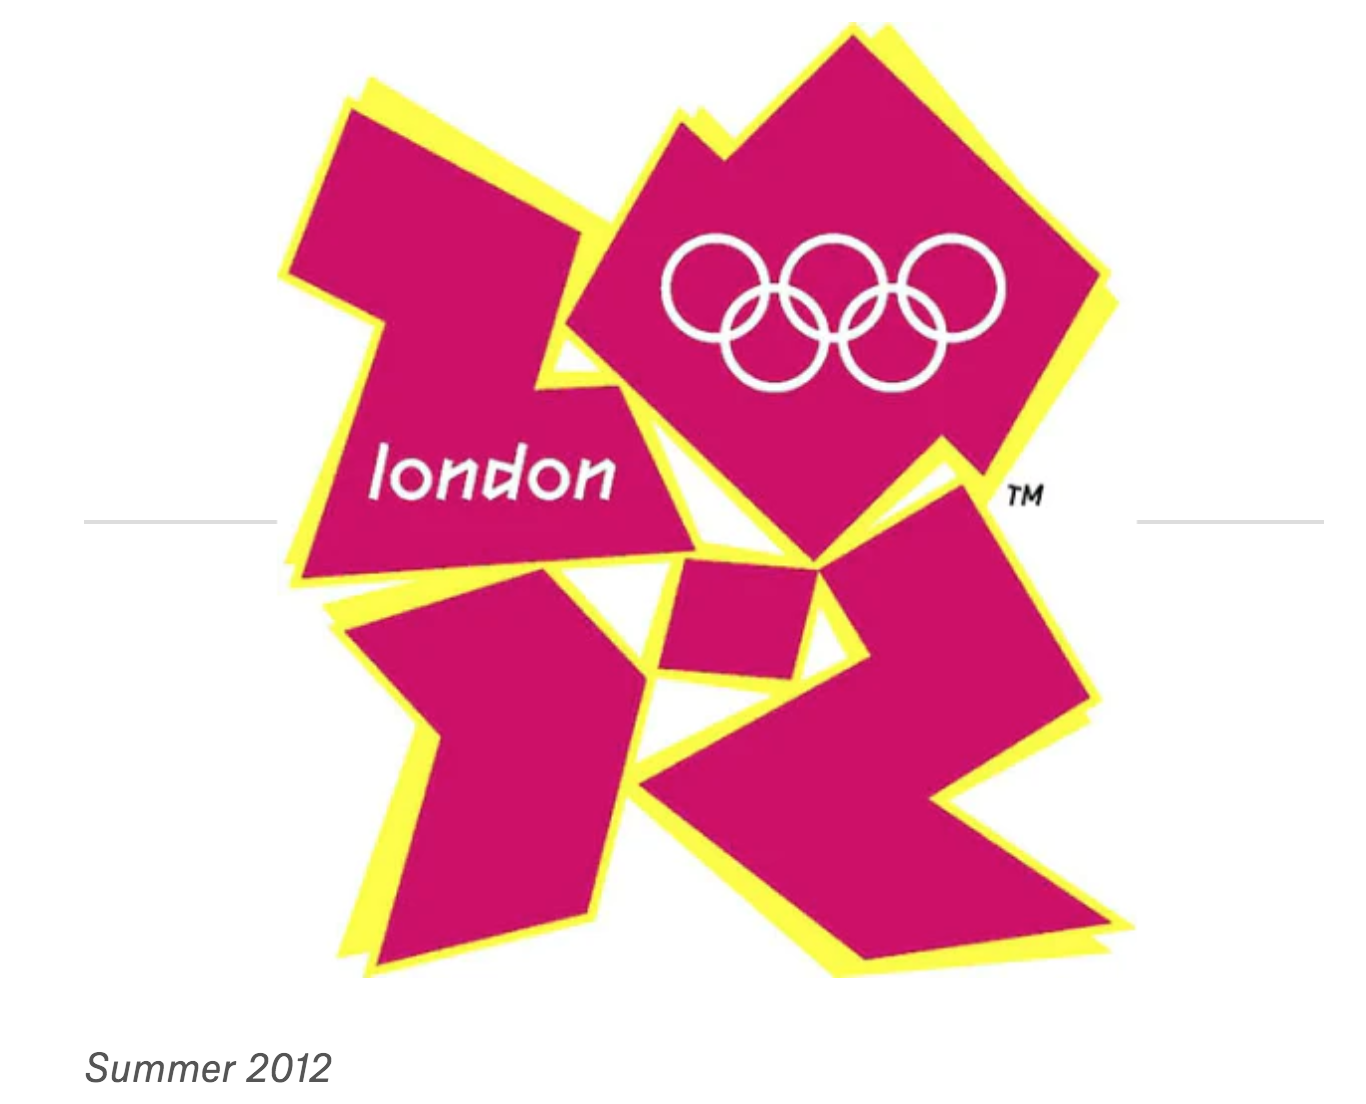 Top logo mistakes: An image depicting the 2012 London Olympics logo. 